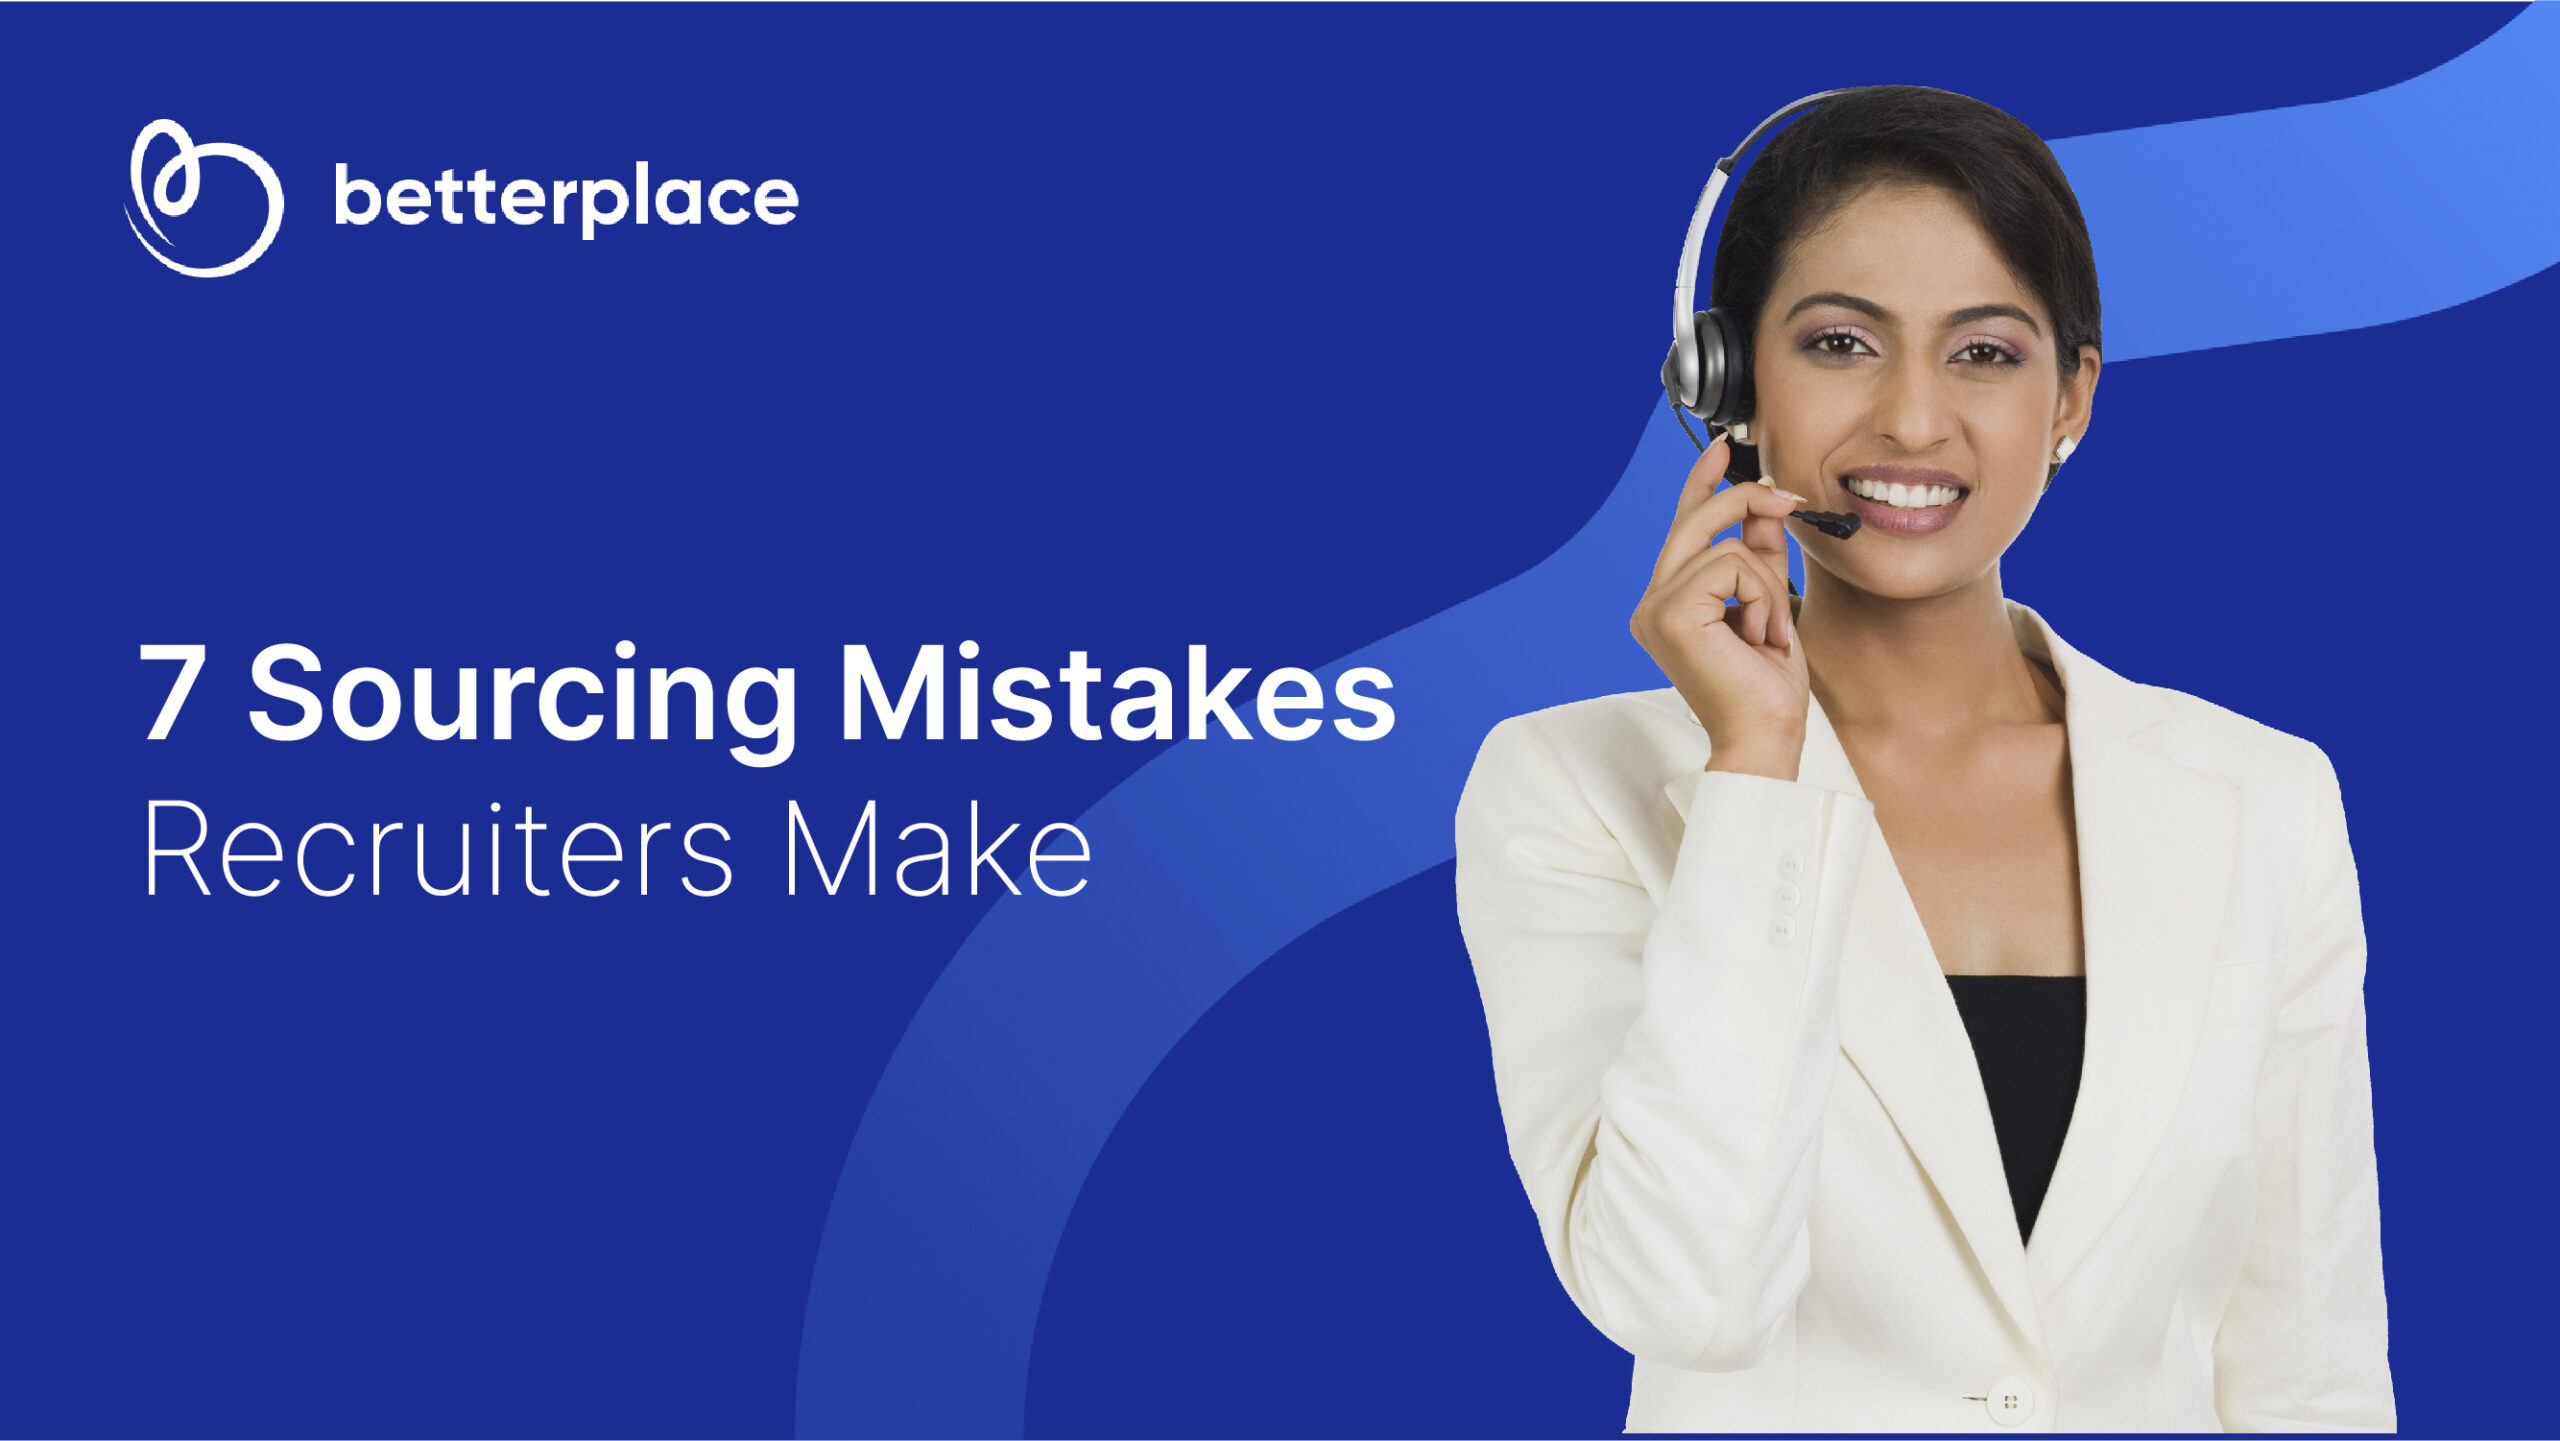 7 Sourcing Mistakes Recruiters Make